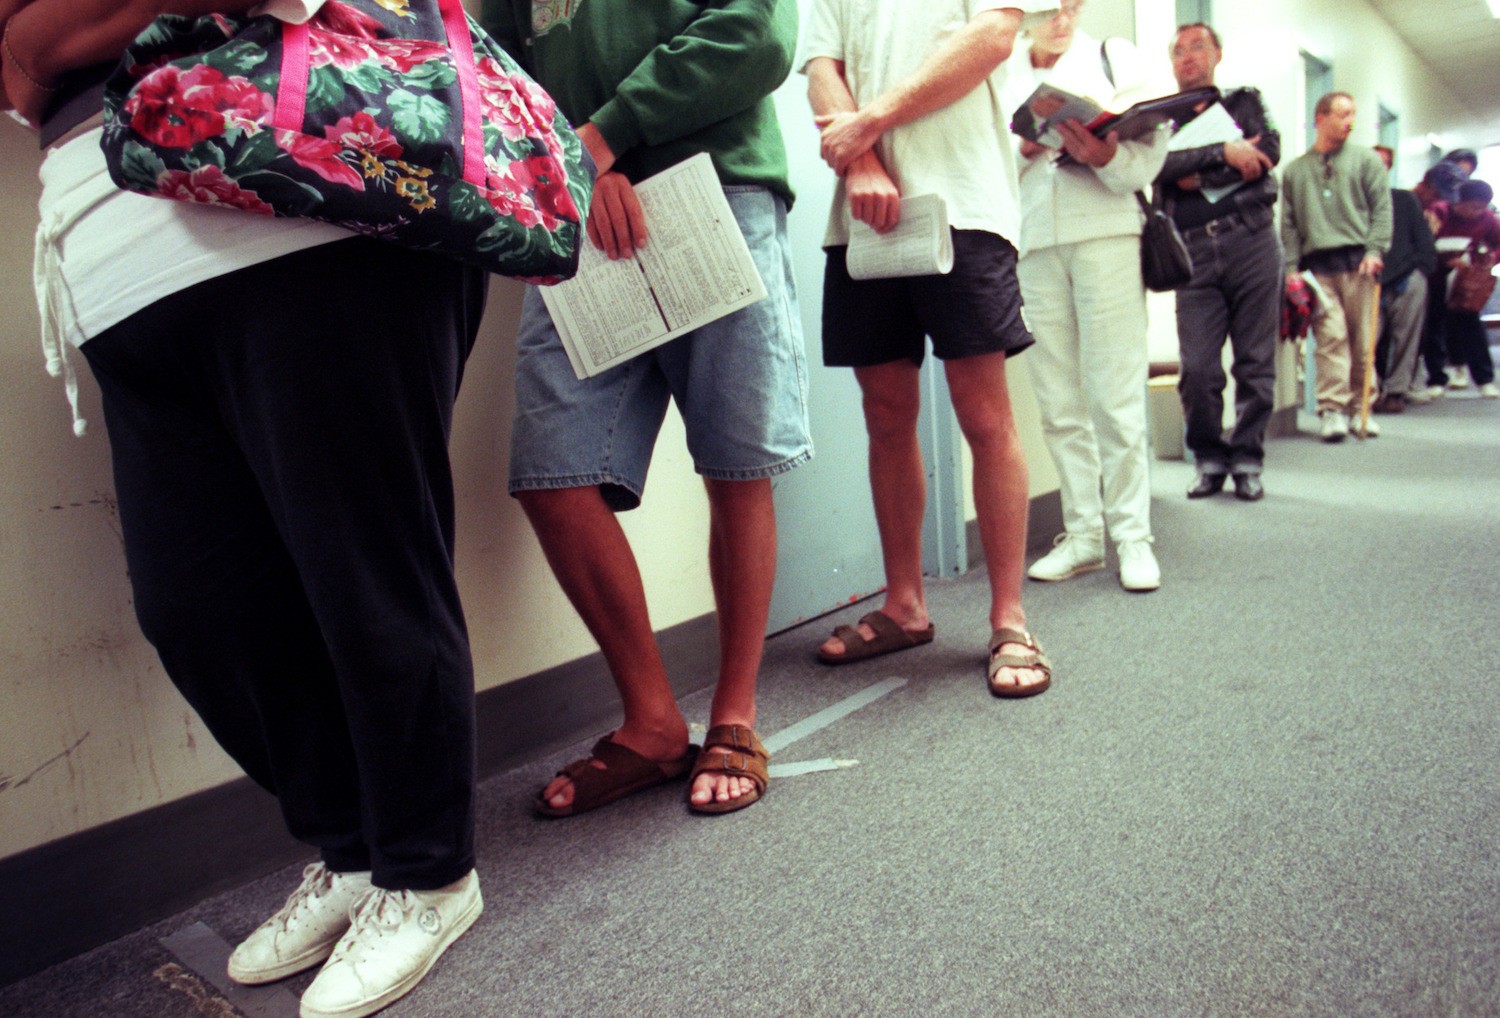 Applicants for food stamps line up in the hallway while they wait for their appointments with a counselor at the Dept of Social Services in Santa Ana. The rules for obtaining food stamps has changed with new restrictions on legal immigrants and the working poor.